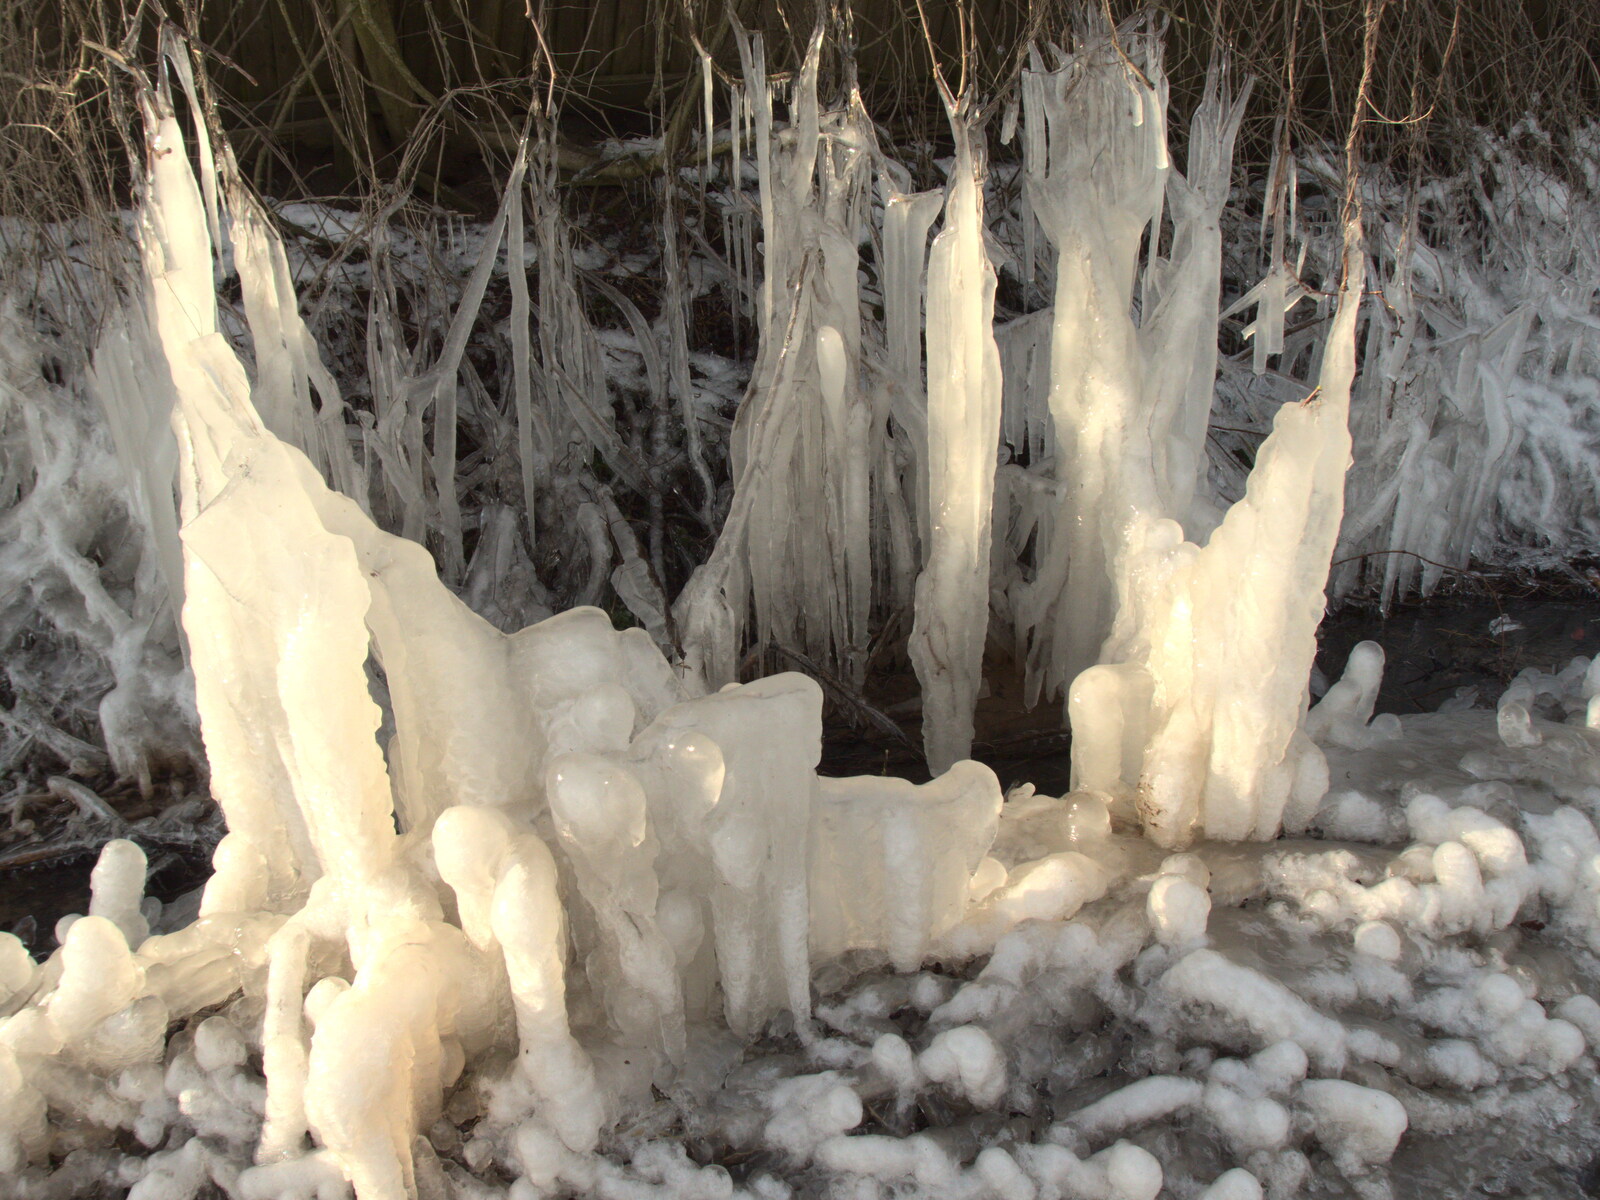 The ice looks like candle wax of stalagmites from Derelict Infants School and Ice Sculptures, Diss and Palgrave, Norfolk and Suffolk - 13th February 2021